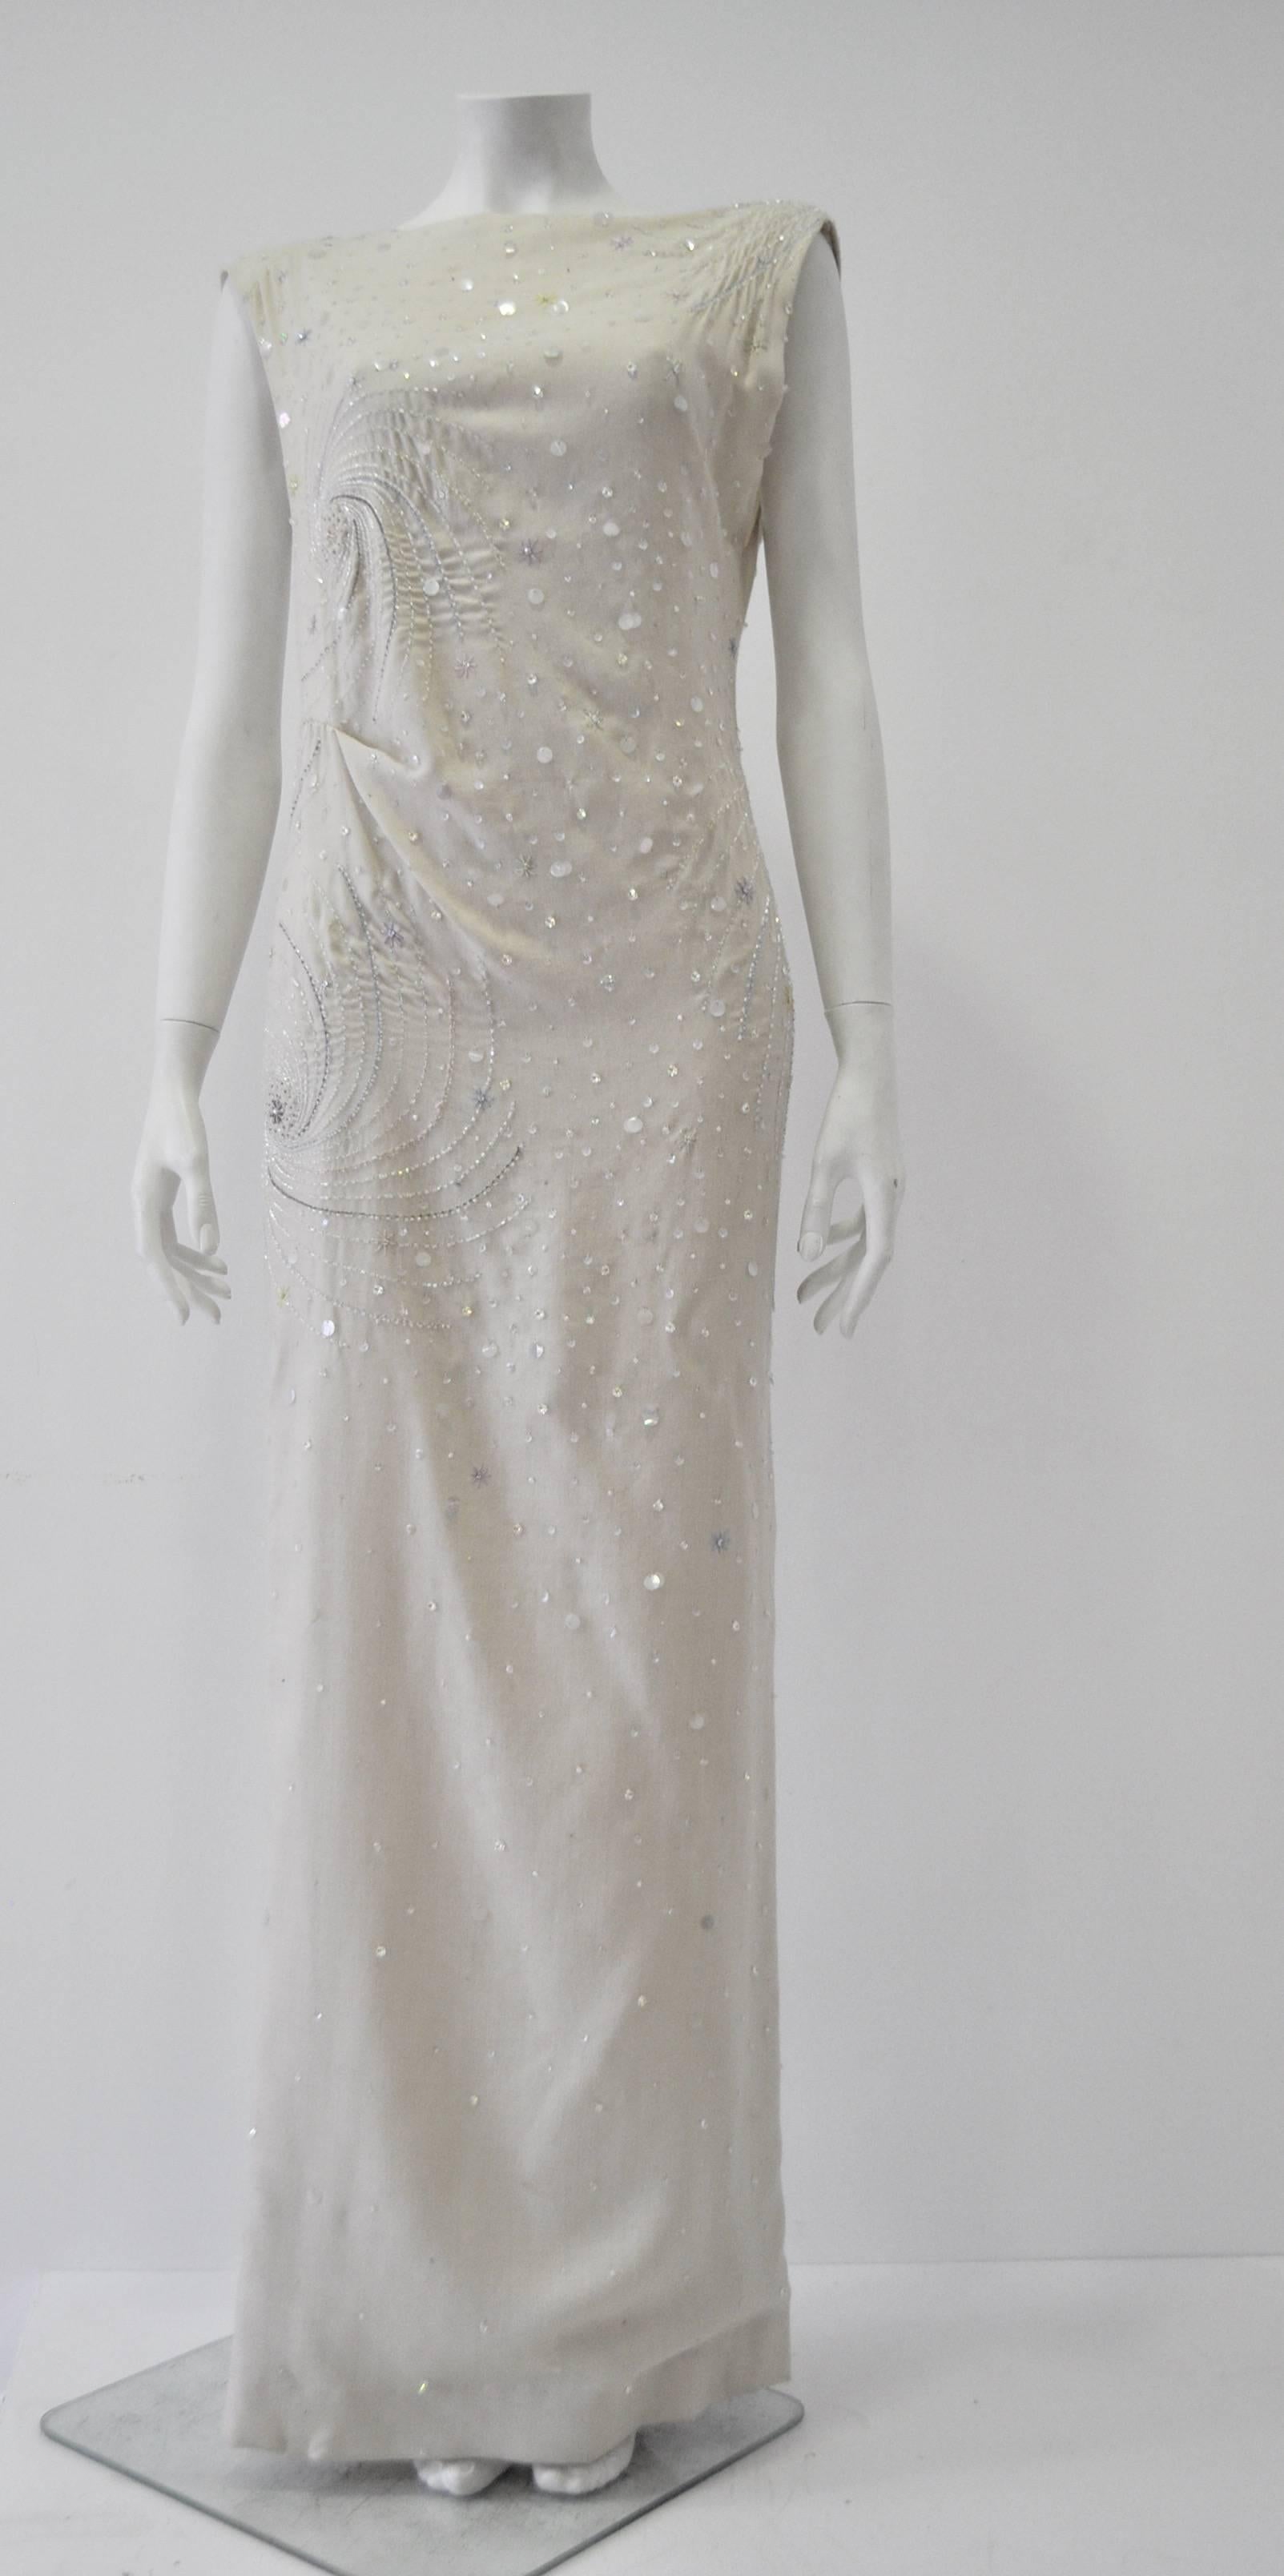 Uber Important Gianni Versace Couture Hand-Beaded Swirls of Pearls and Crystals Creme Lightweight Wool Maxi Dress